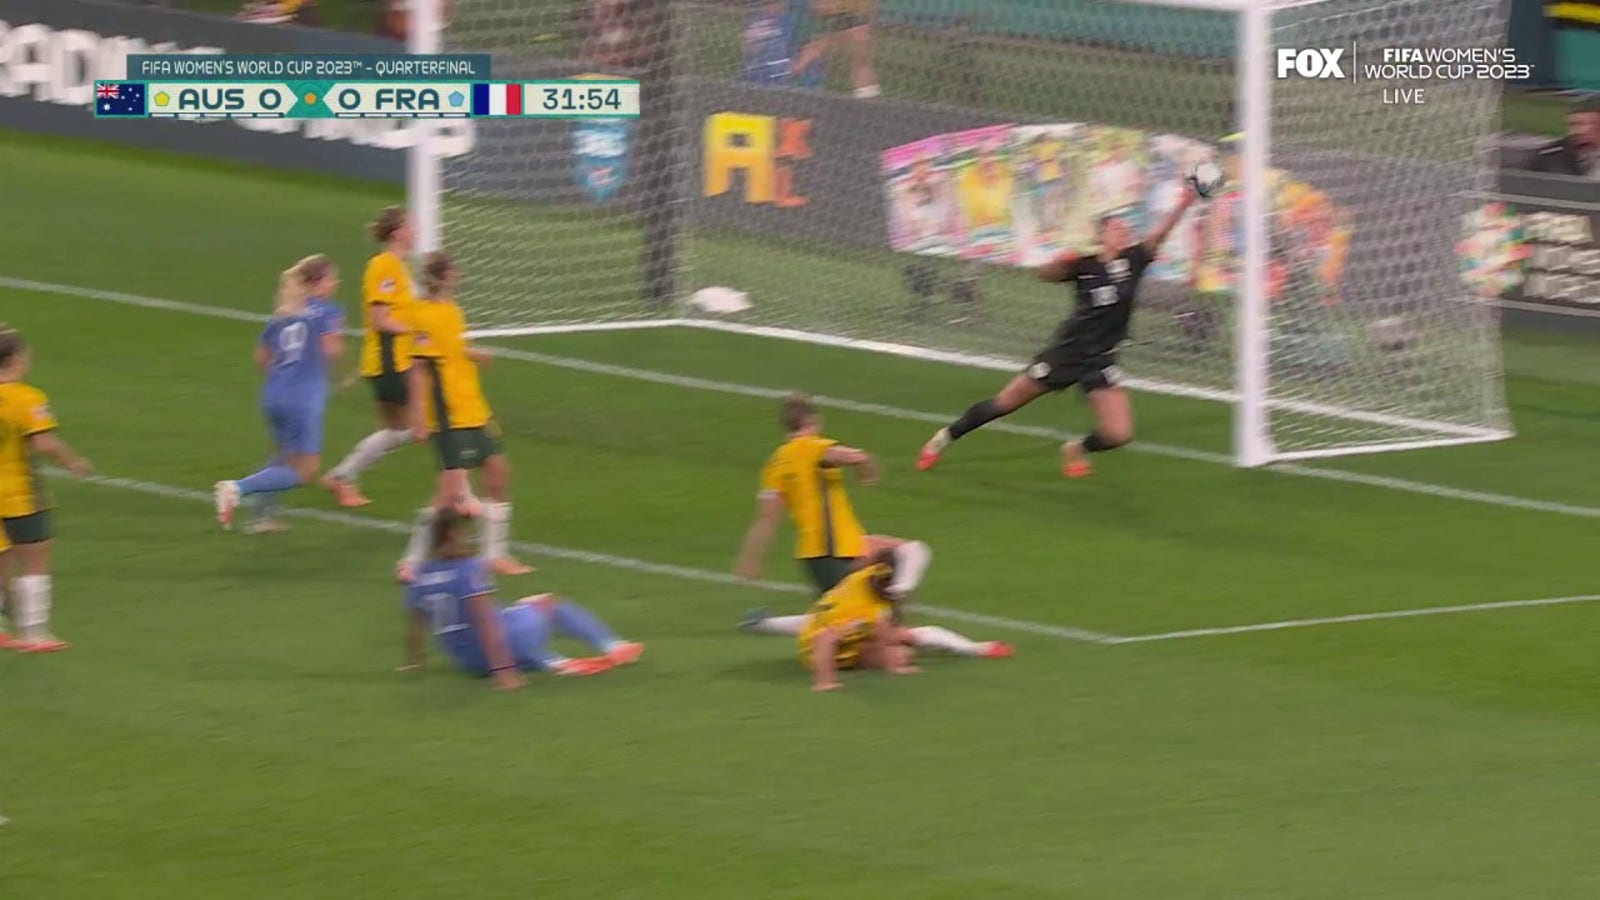 Australia and France remain scoreless after a great save by Mackenzie Arnold